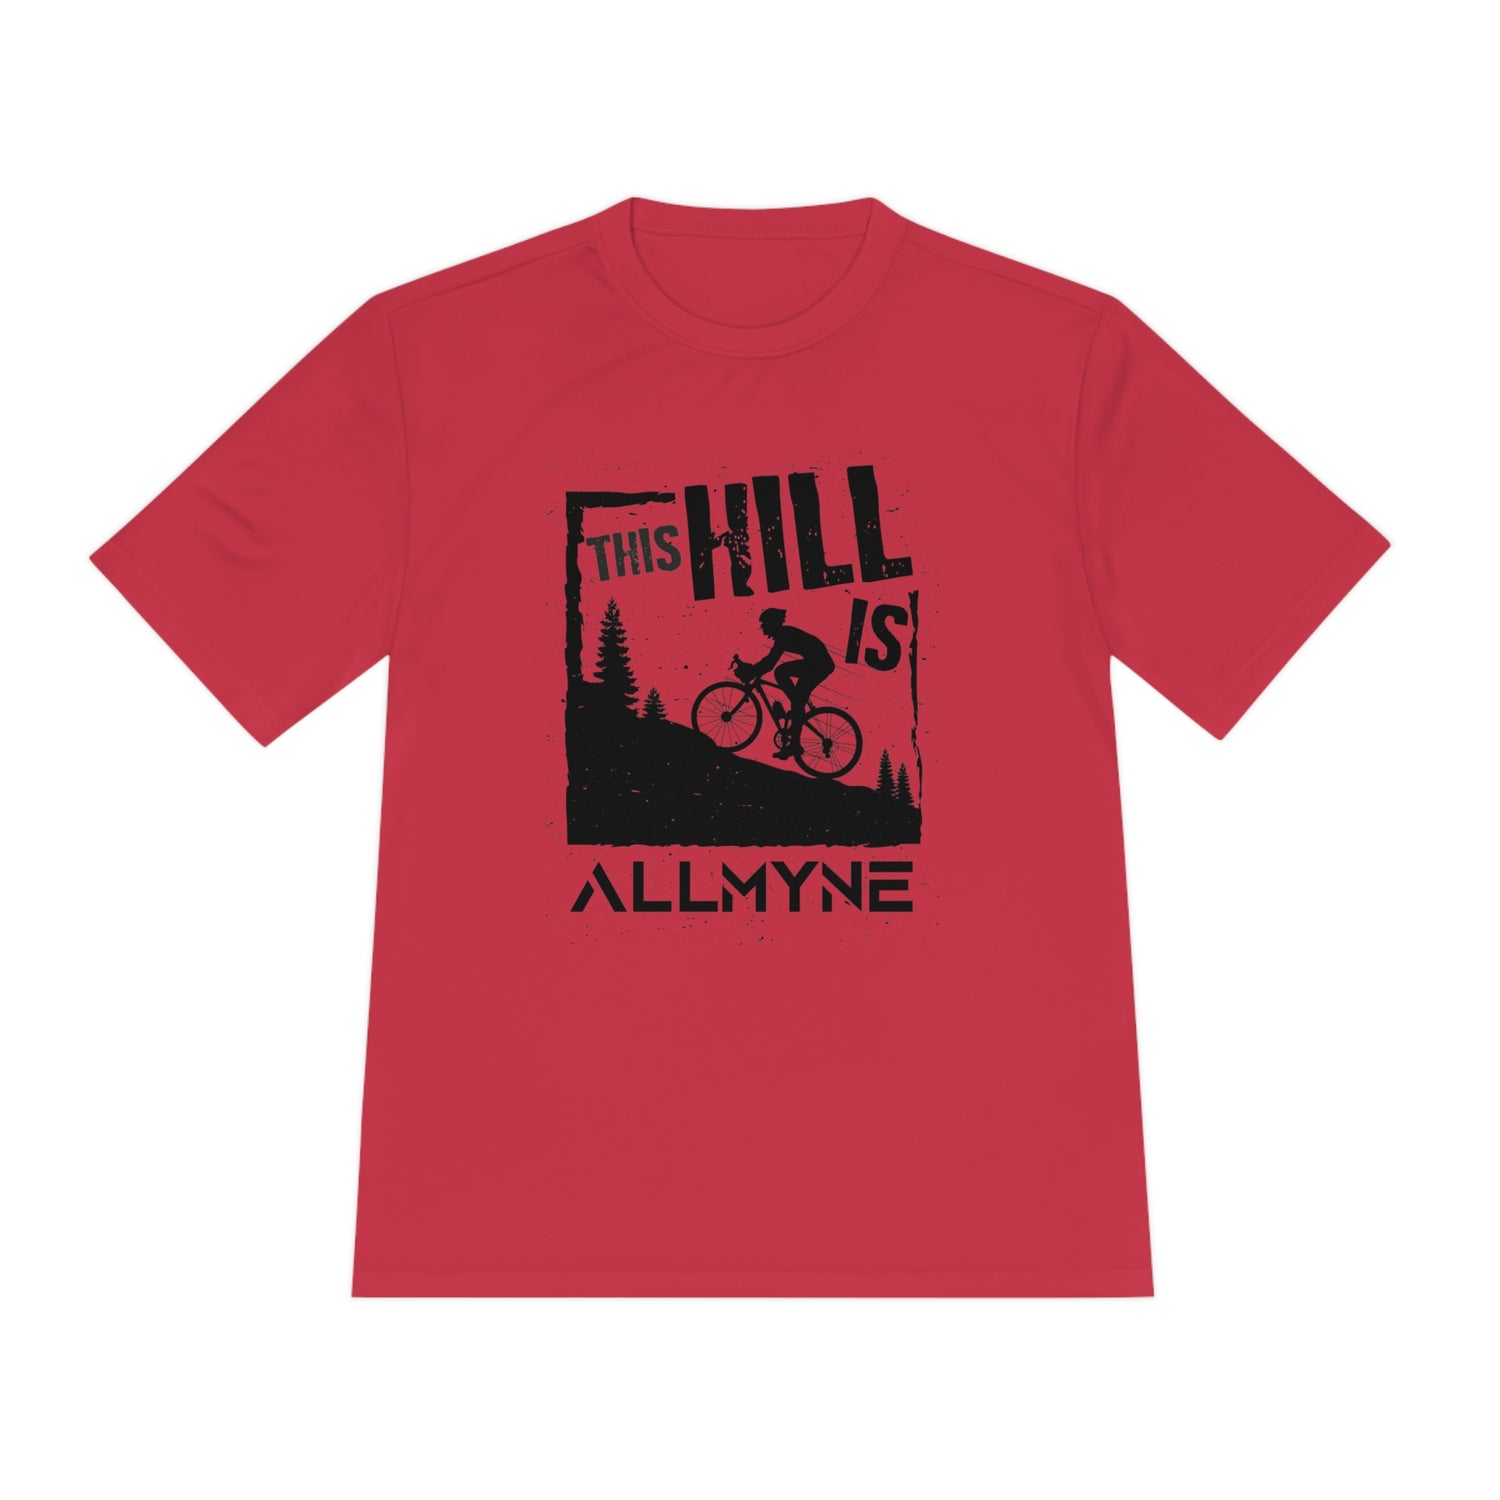 This Hill is ALLMYNE Performance Tee